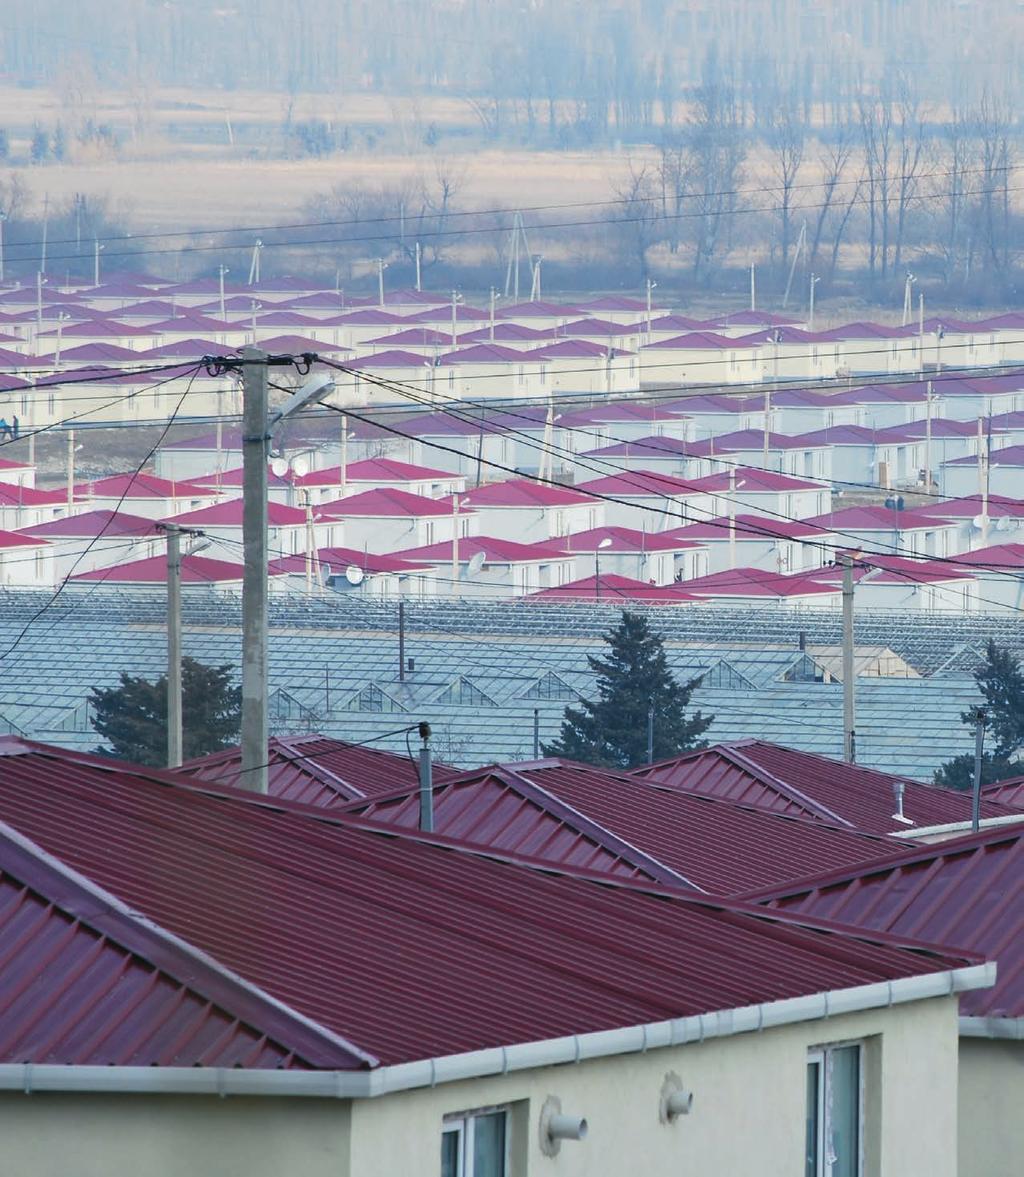 Northwest of Tbilisi, the Tserovani settlement, with 2,000 cabins, is the largest.